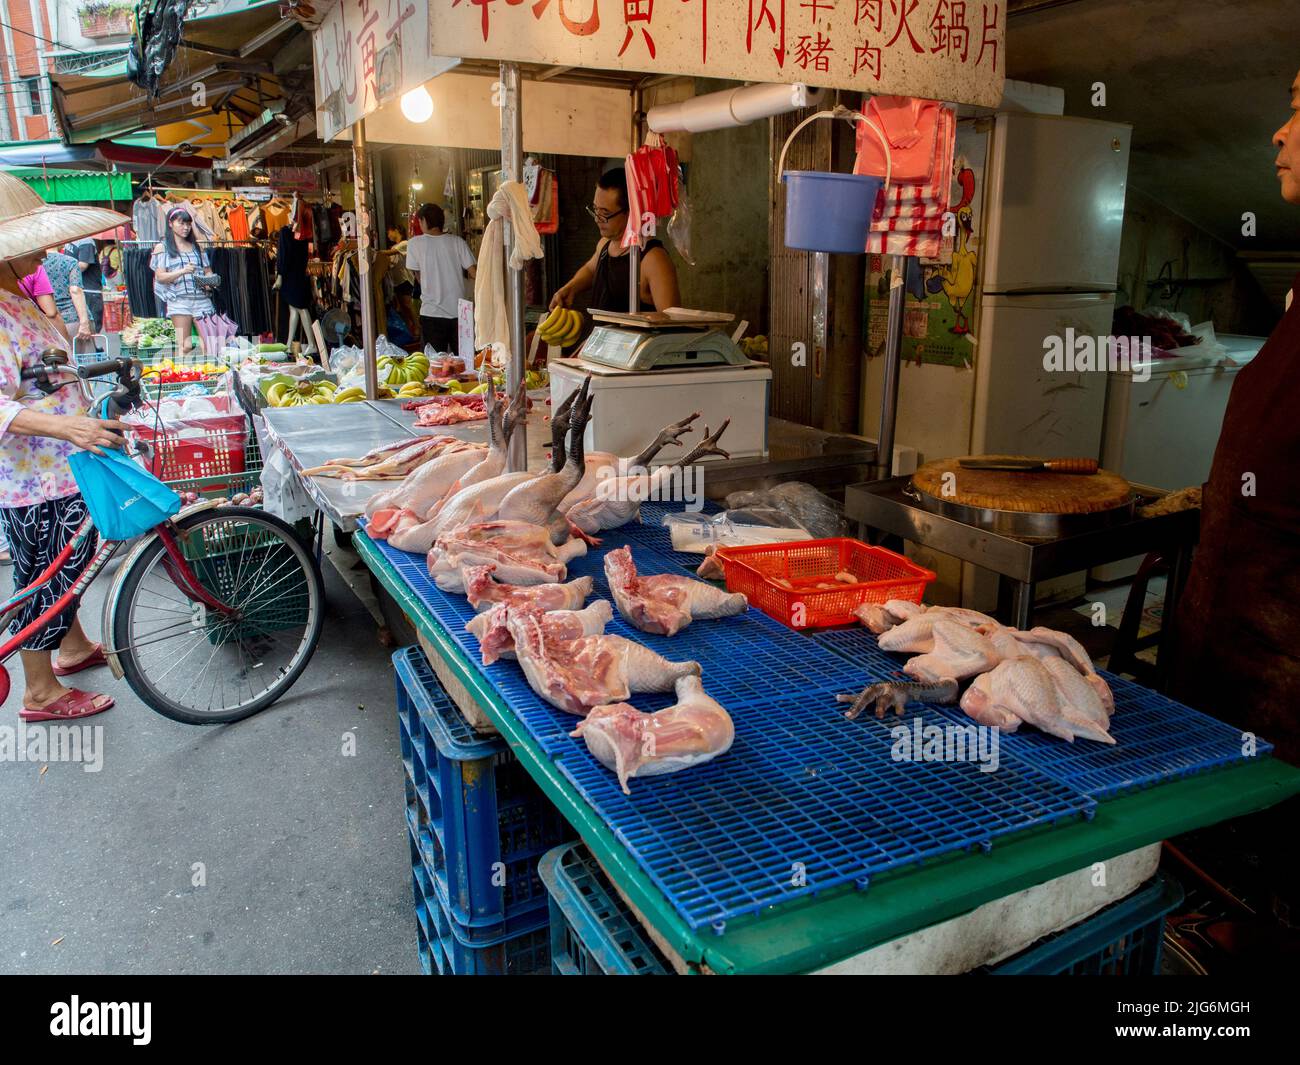 Taipei, Taiwan - October 04, 2016: Hens with heads and feet on a local market  in New Taipei City. Asia. Stock Photo